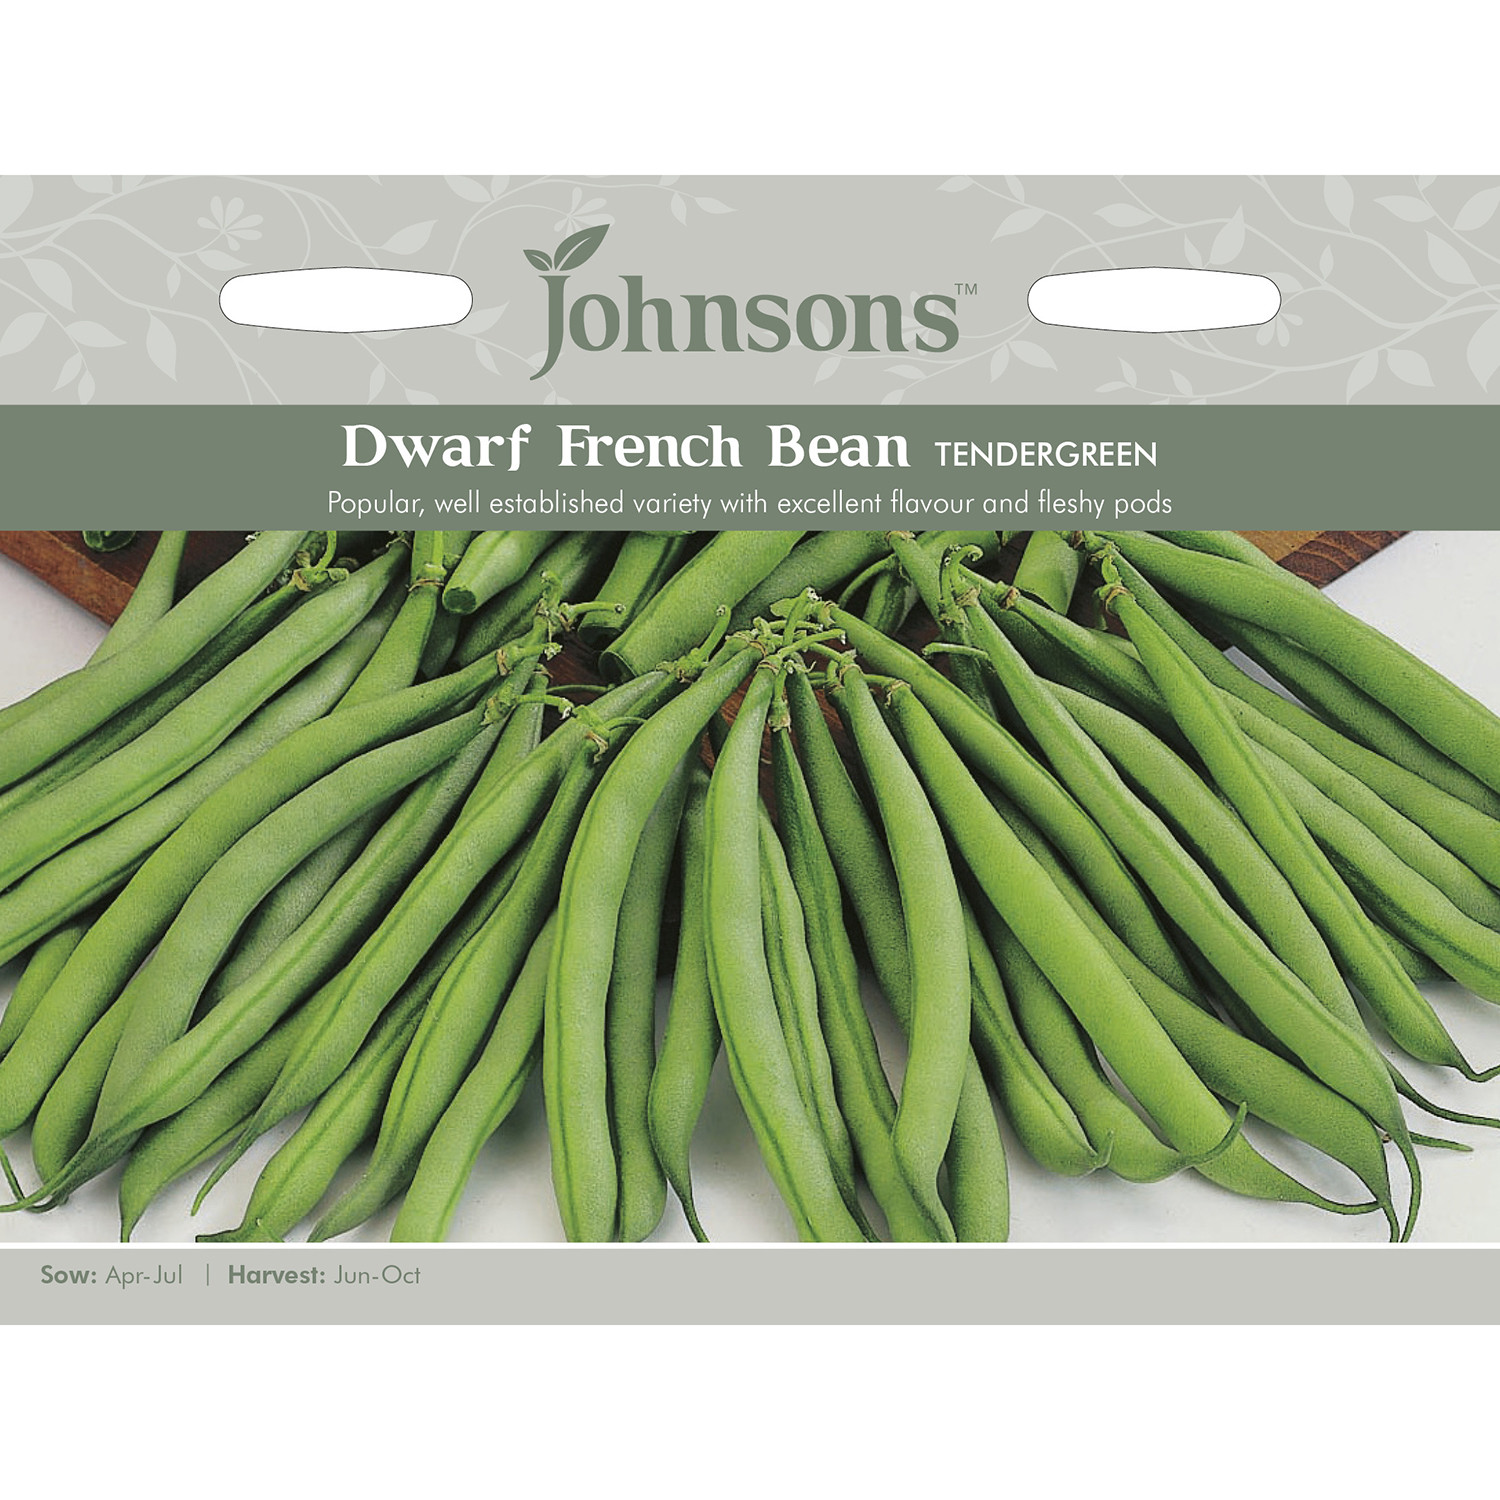 Pack of Tendergreen Dwarf French Bean Seeds Image 1